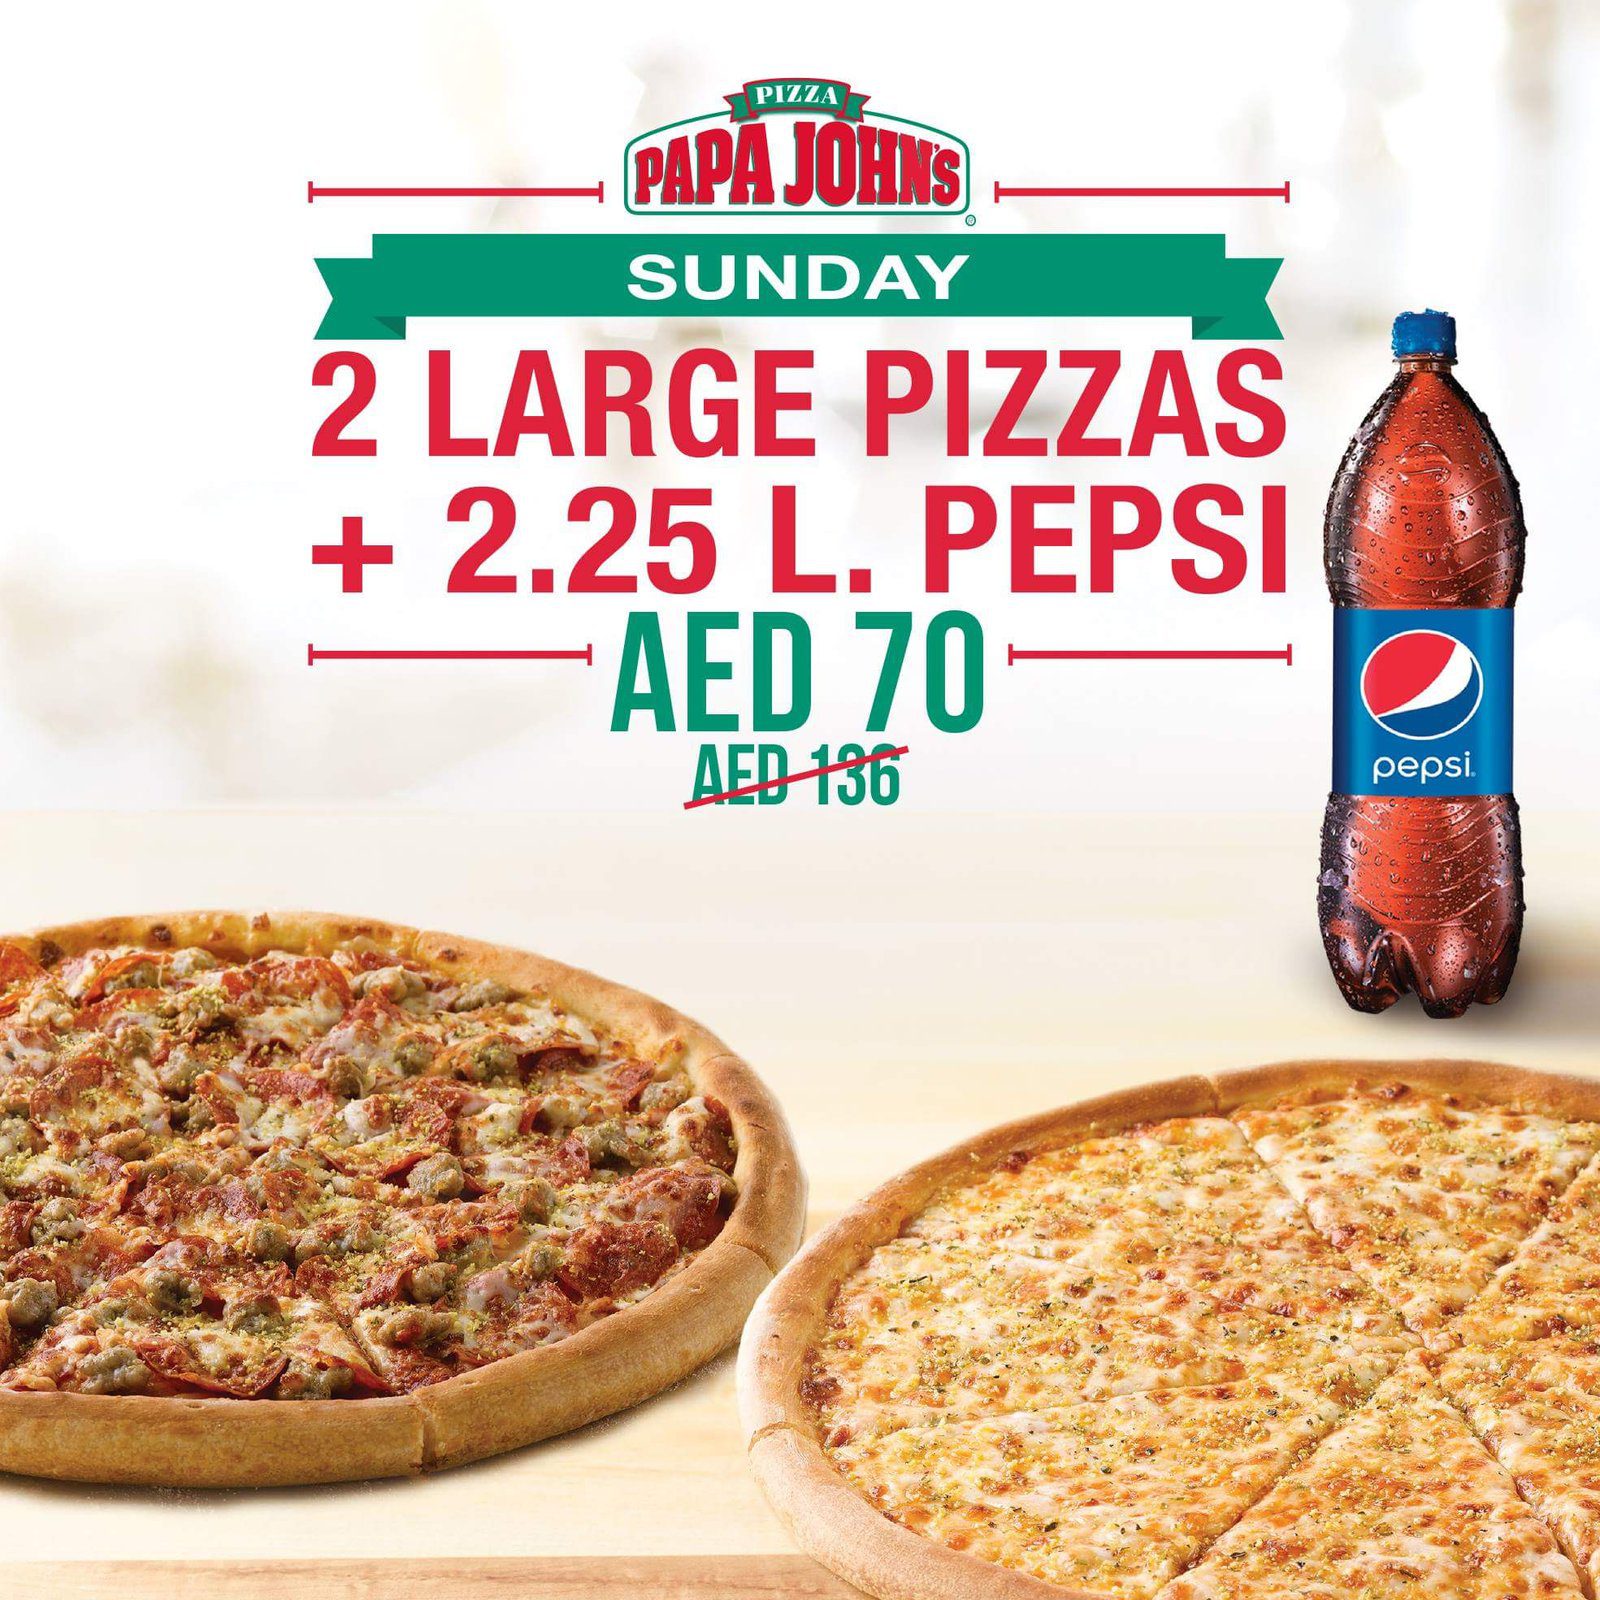 Delicious Sunday Offer of Papa John’s Pizza